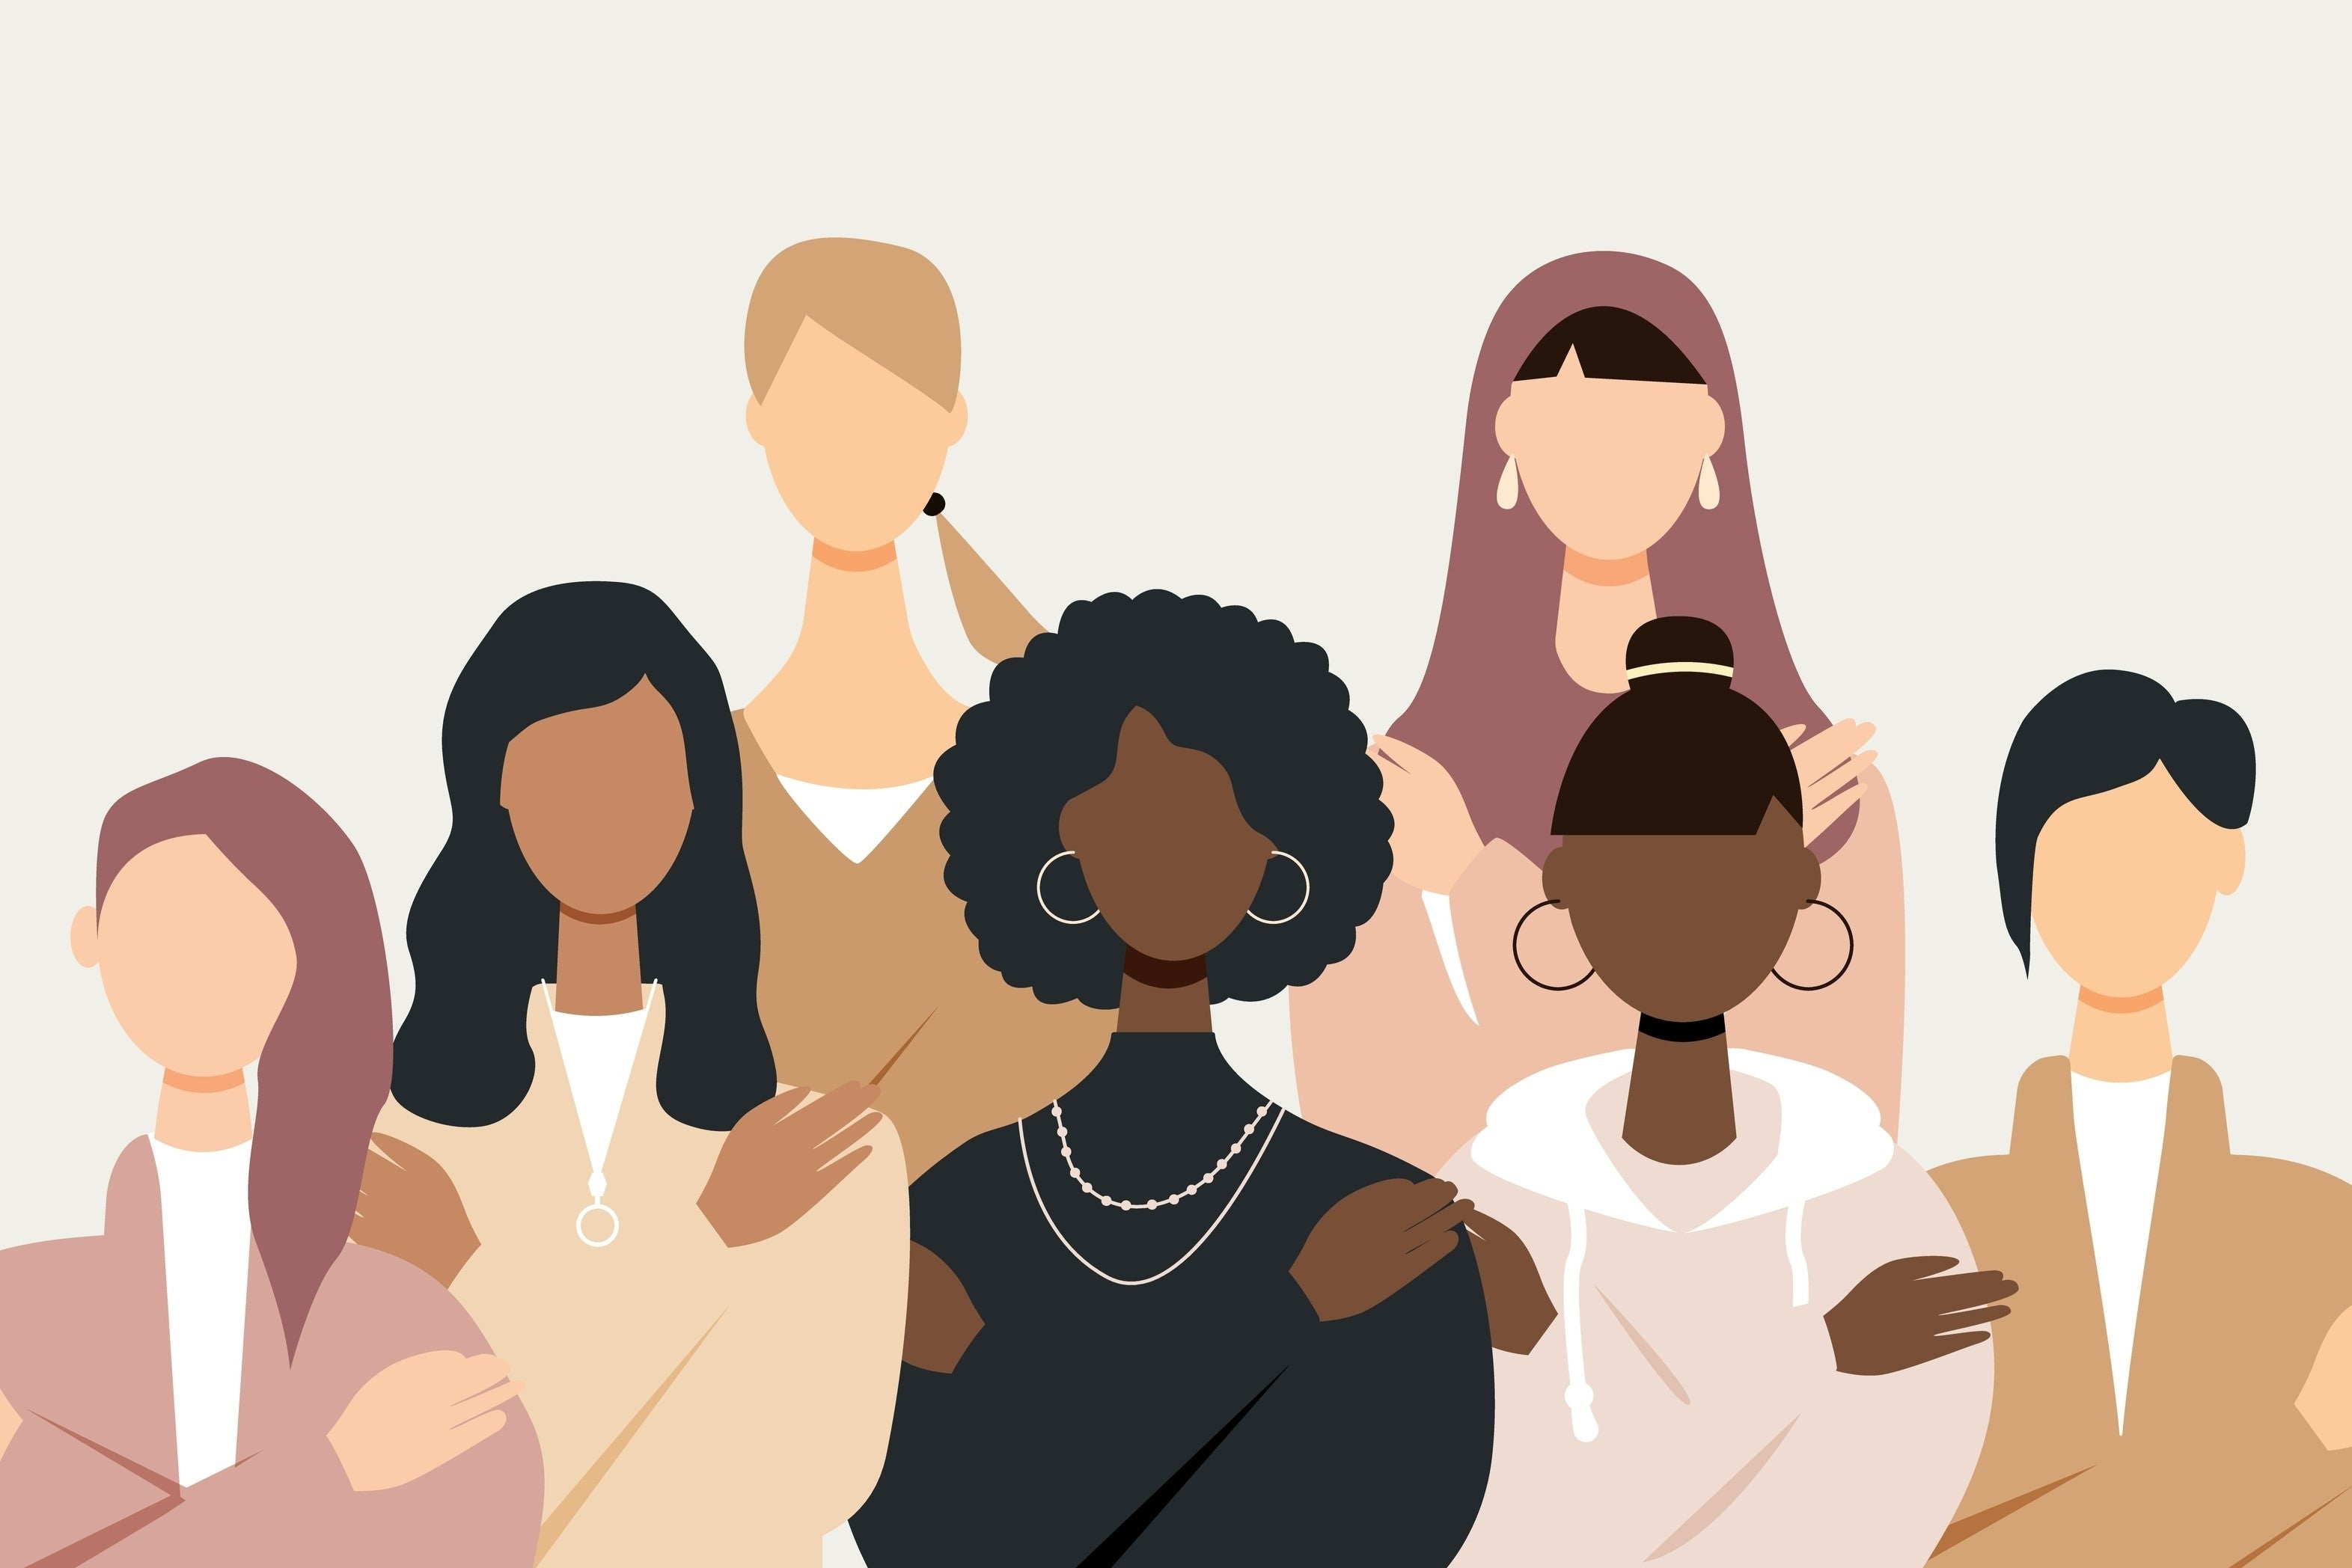 illustration of several women of varying races